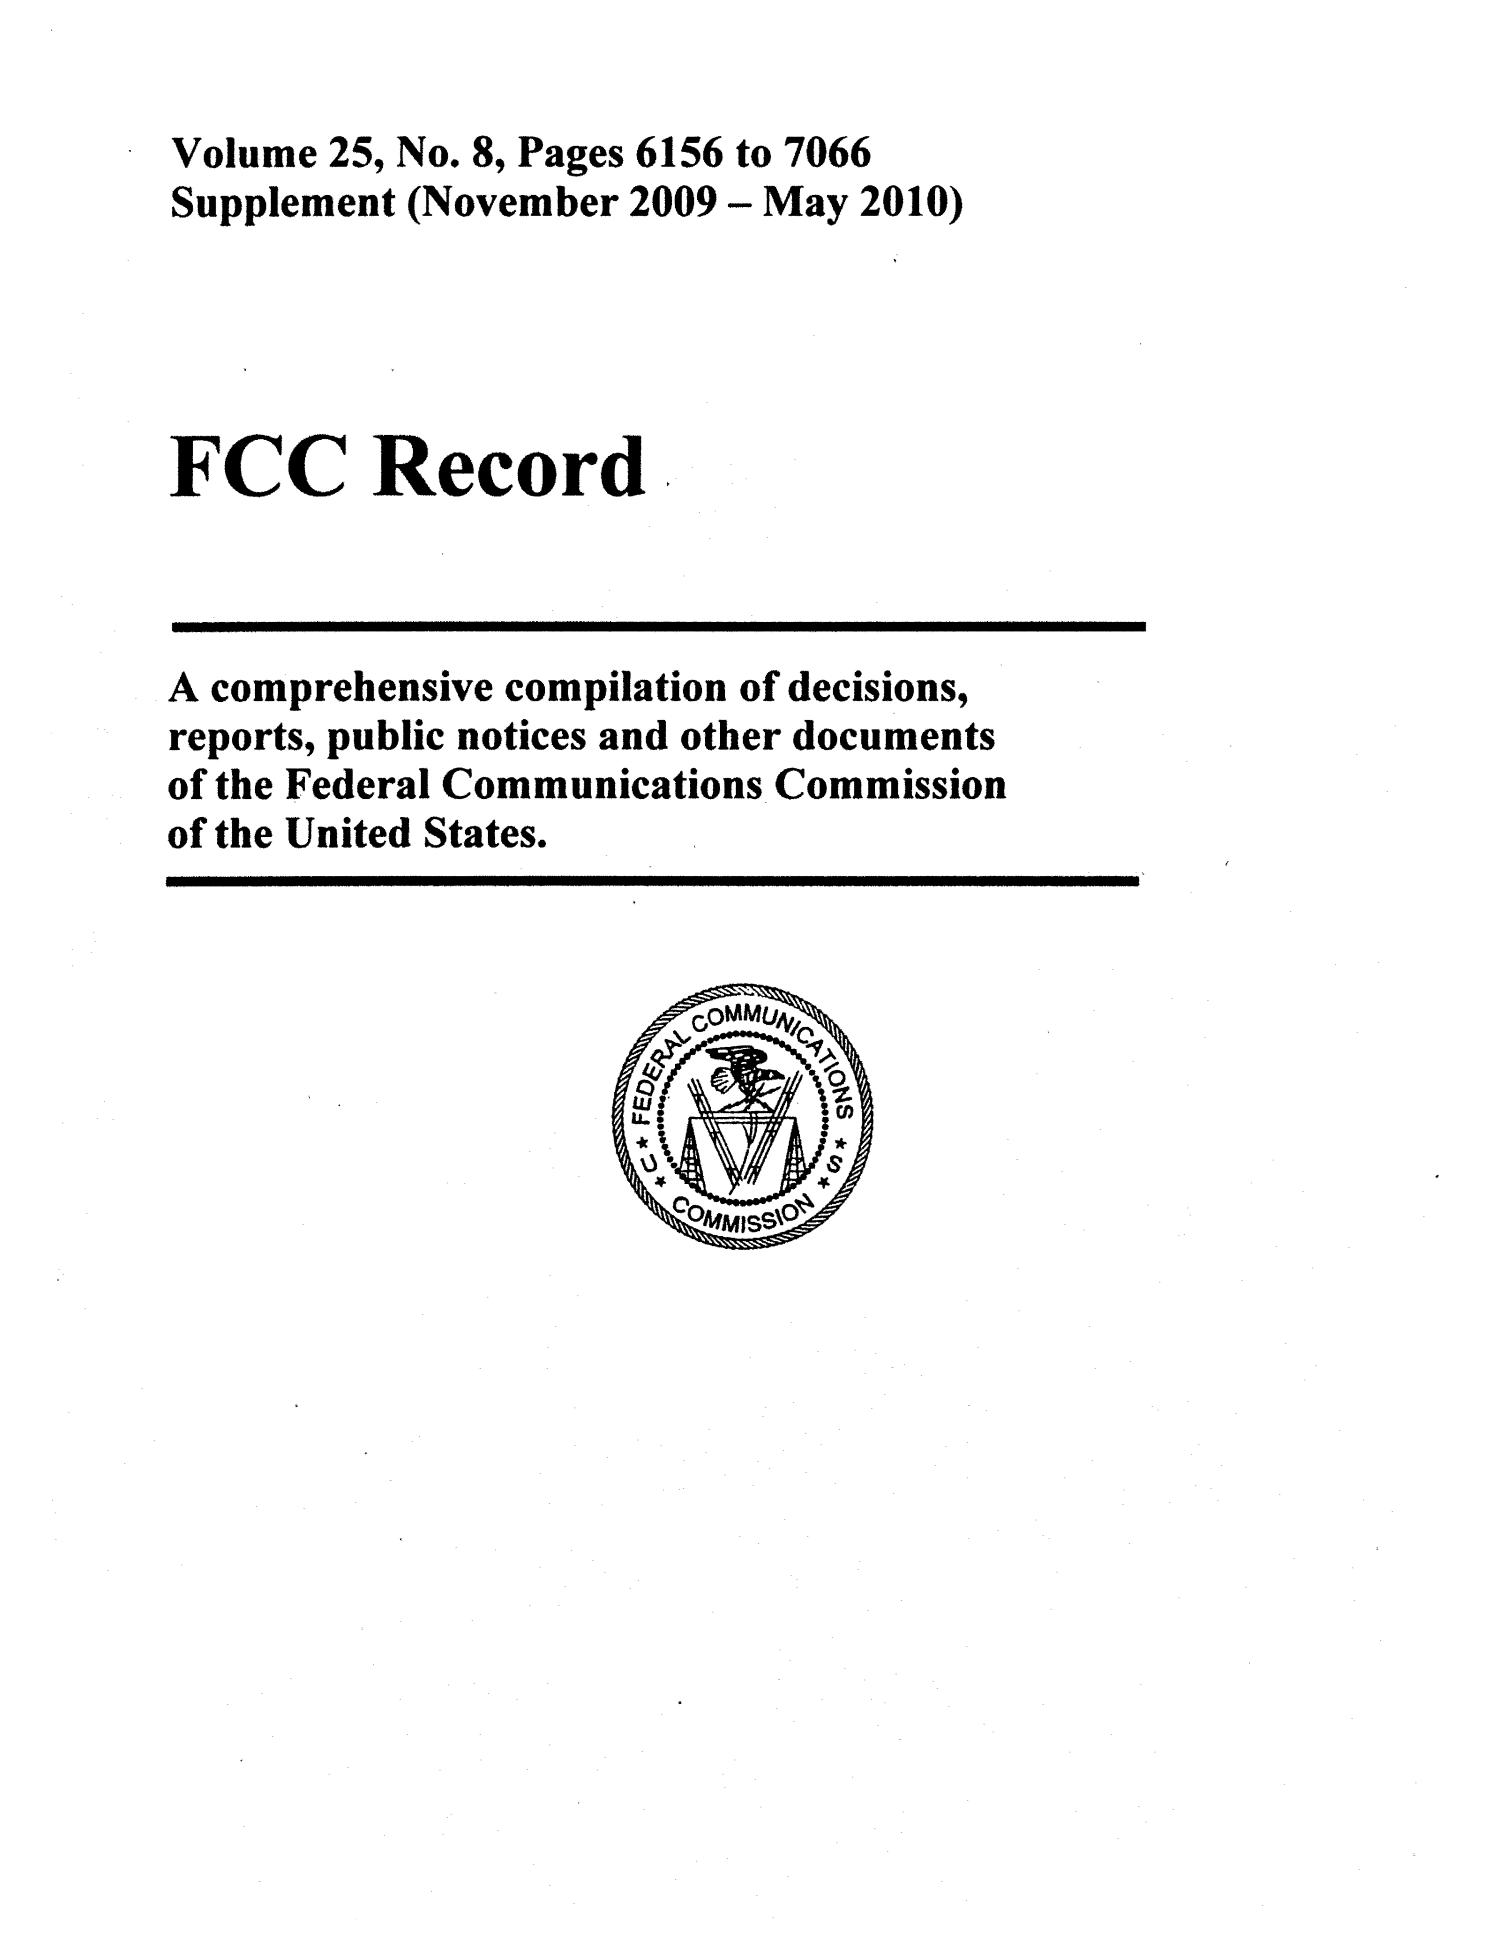 FCC Record, Volume 25, No. 8, Pages 6156 to 7066 Supplement (November 2009-May 2010)
                                                
                                                    Front Cover
                                                